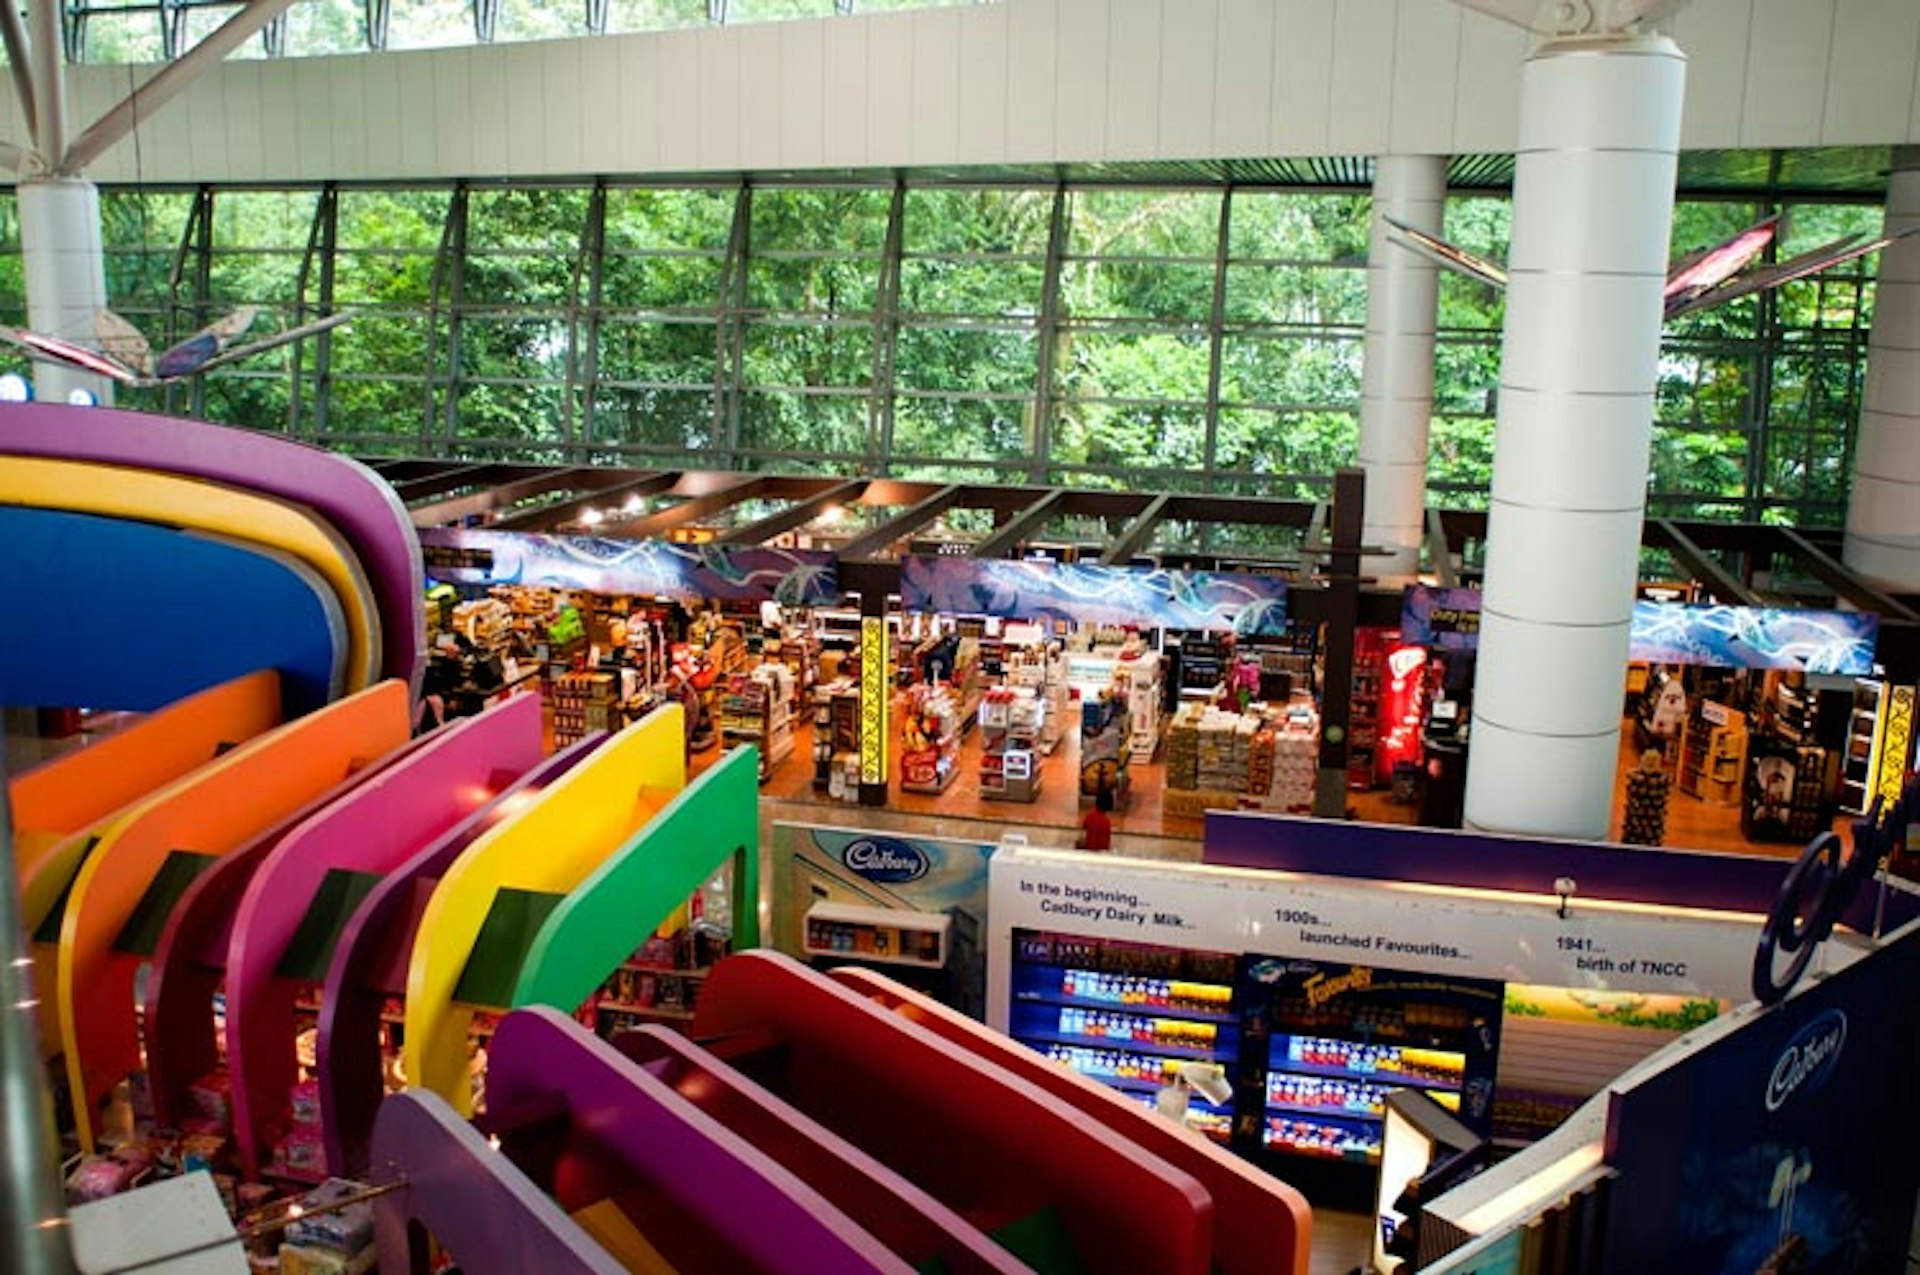 Colour, natural light and... a jungle retreat? Kuala Lumpur airport is casting aside the impersonal and chaotic airport stereotype. Image by Tom Cockrem / Getty Images